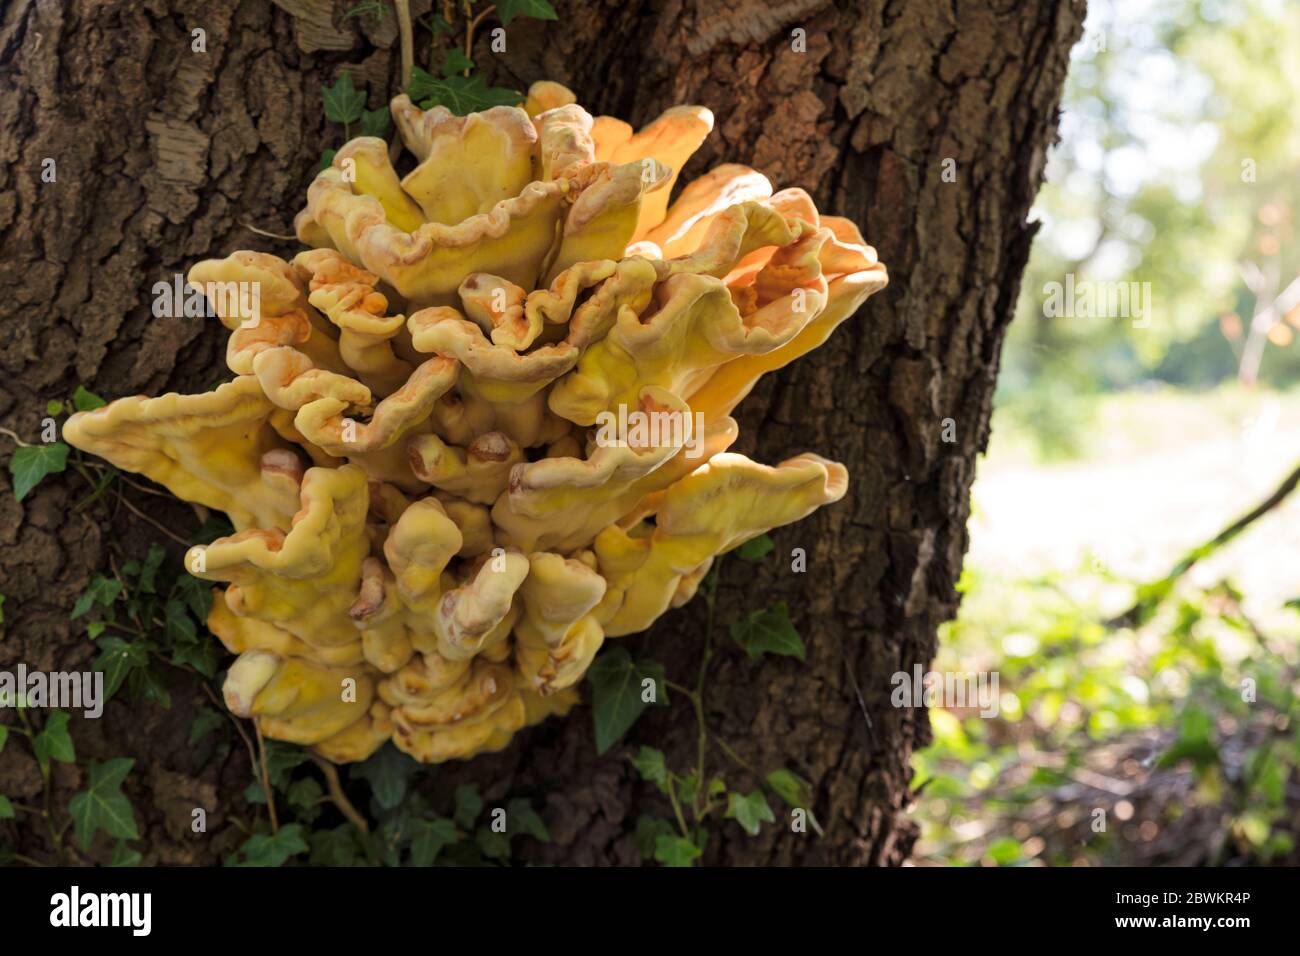 Tree Fungus Meripilus Giganteus Growing on a Tree in May in Holland Stock Photo